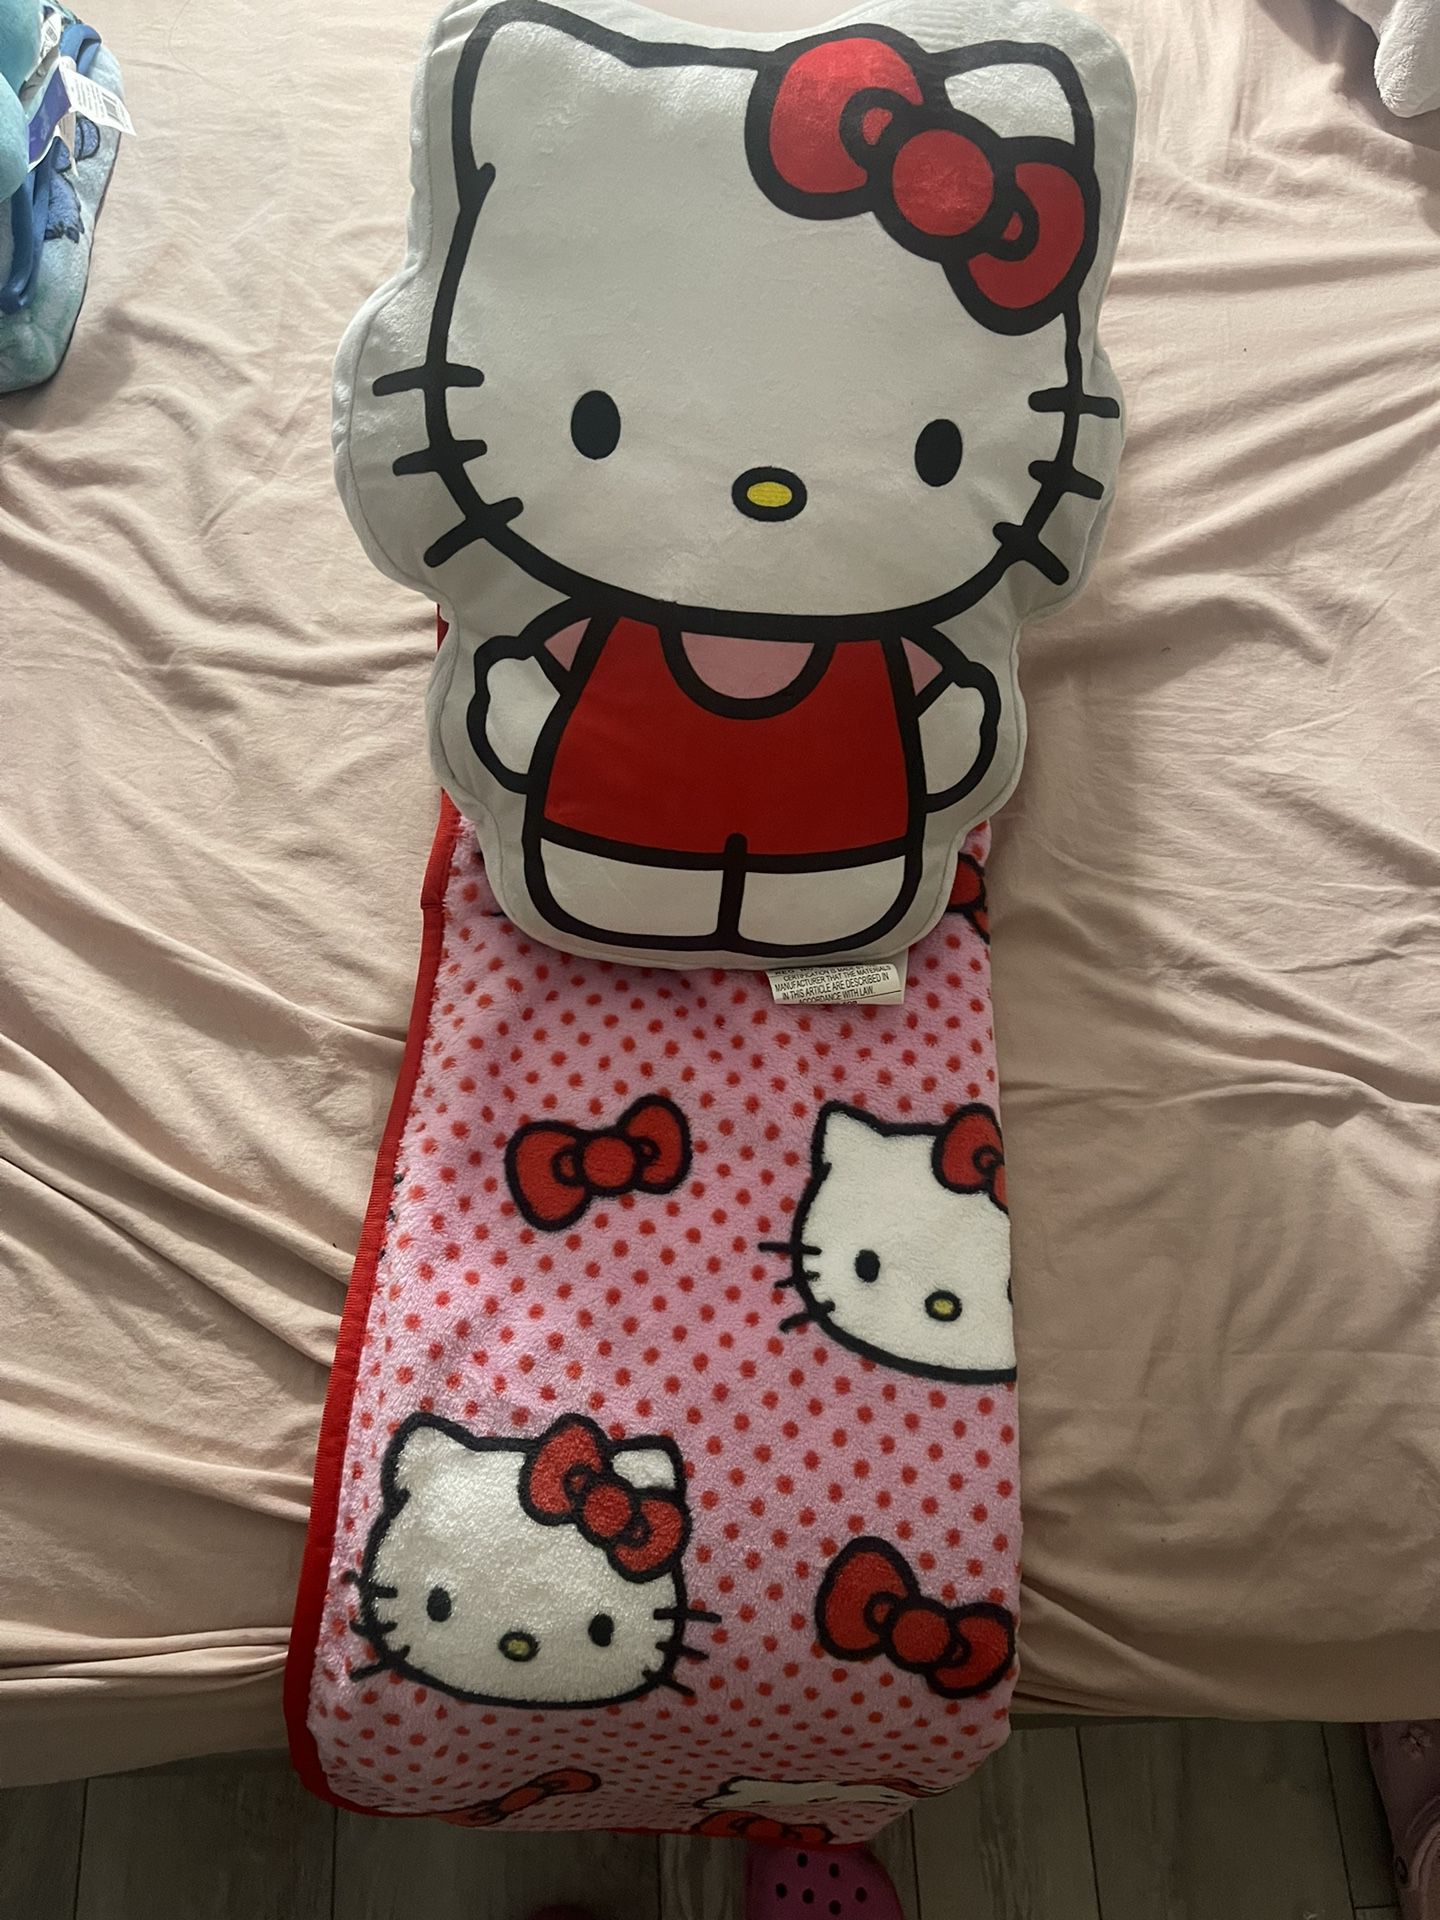 small Hello Kitty Pillow And Blanket Very Nice Birthday Gift!